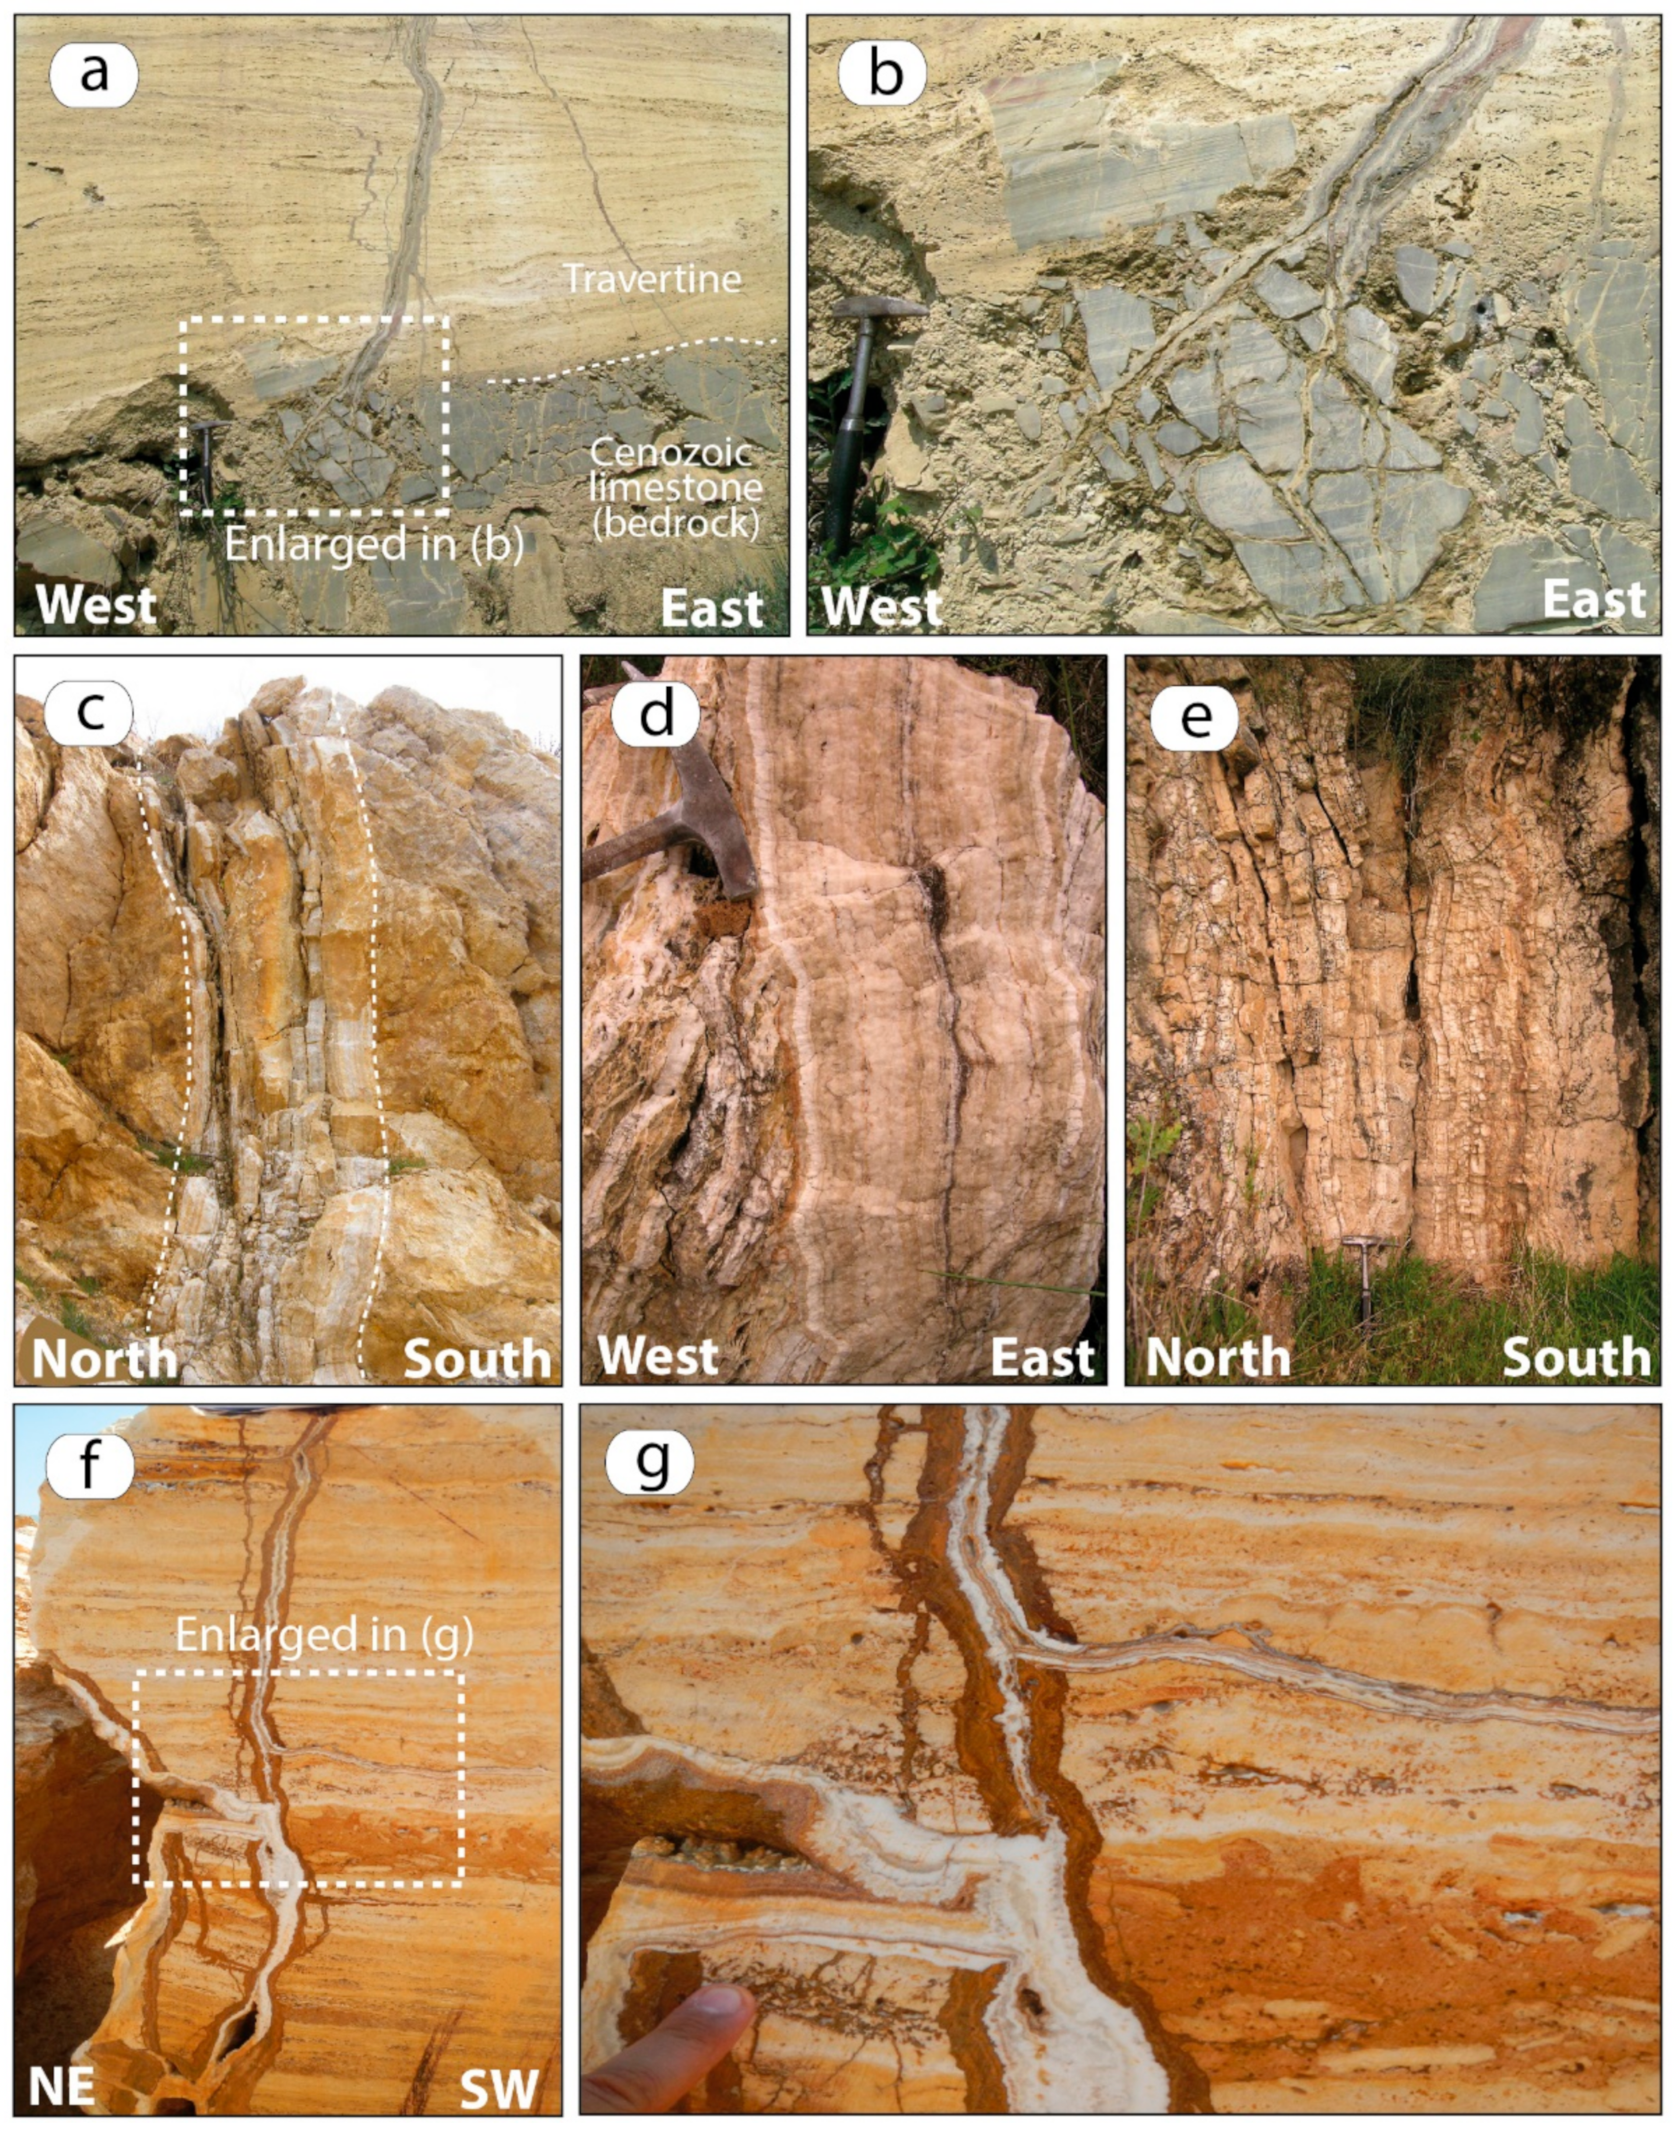 Geosciences Free Full Text Fissure Ridges A Reappraisal Of Faulting And Travertine Deposition Travitonics Html